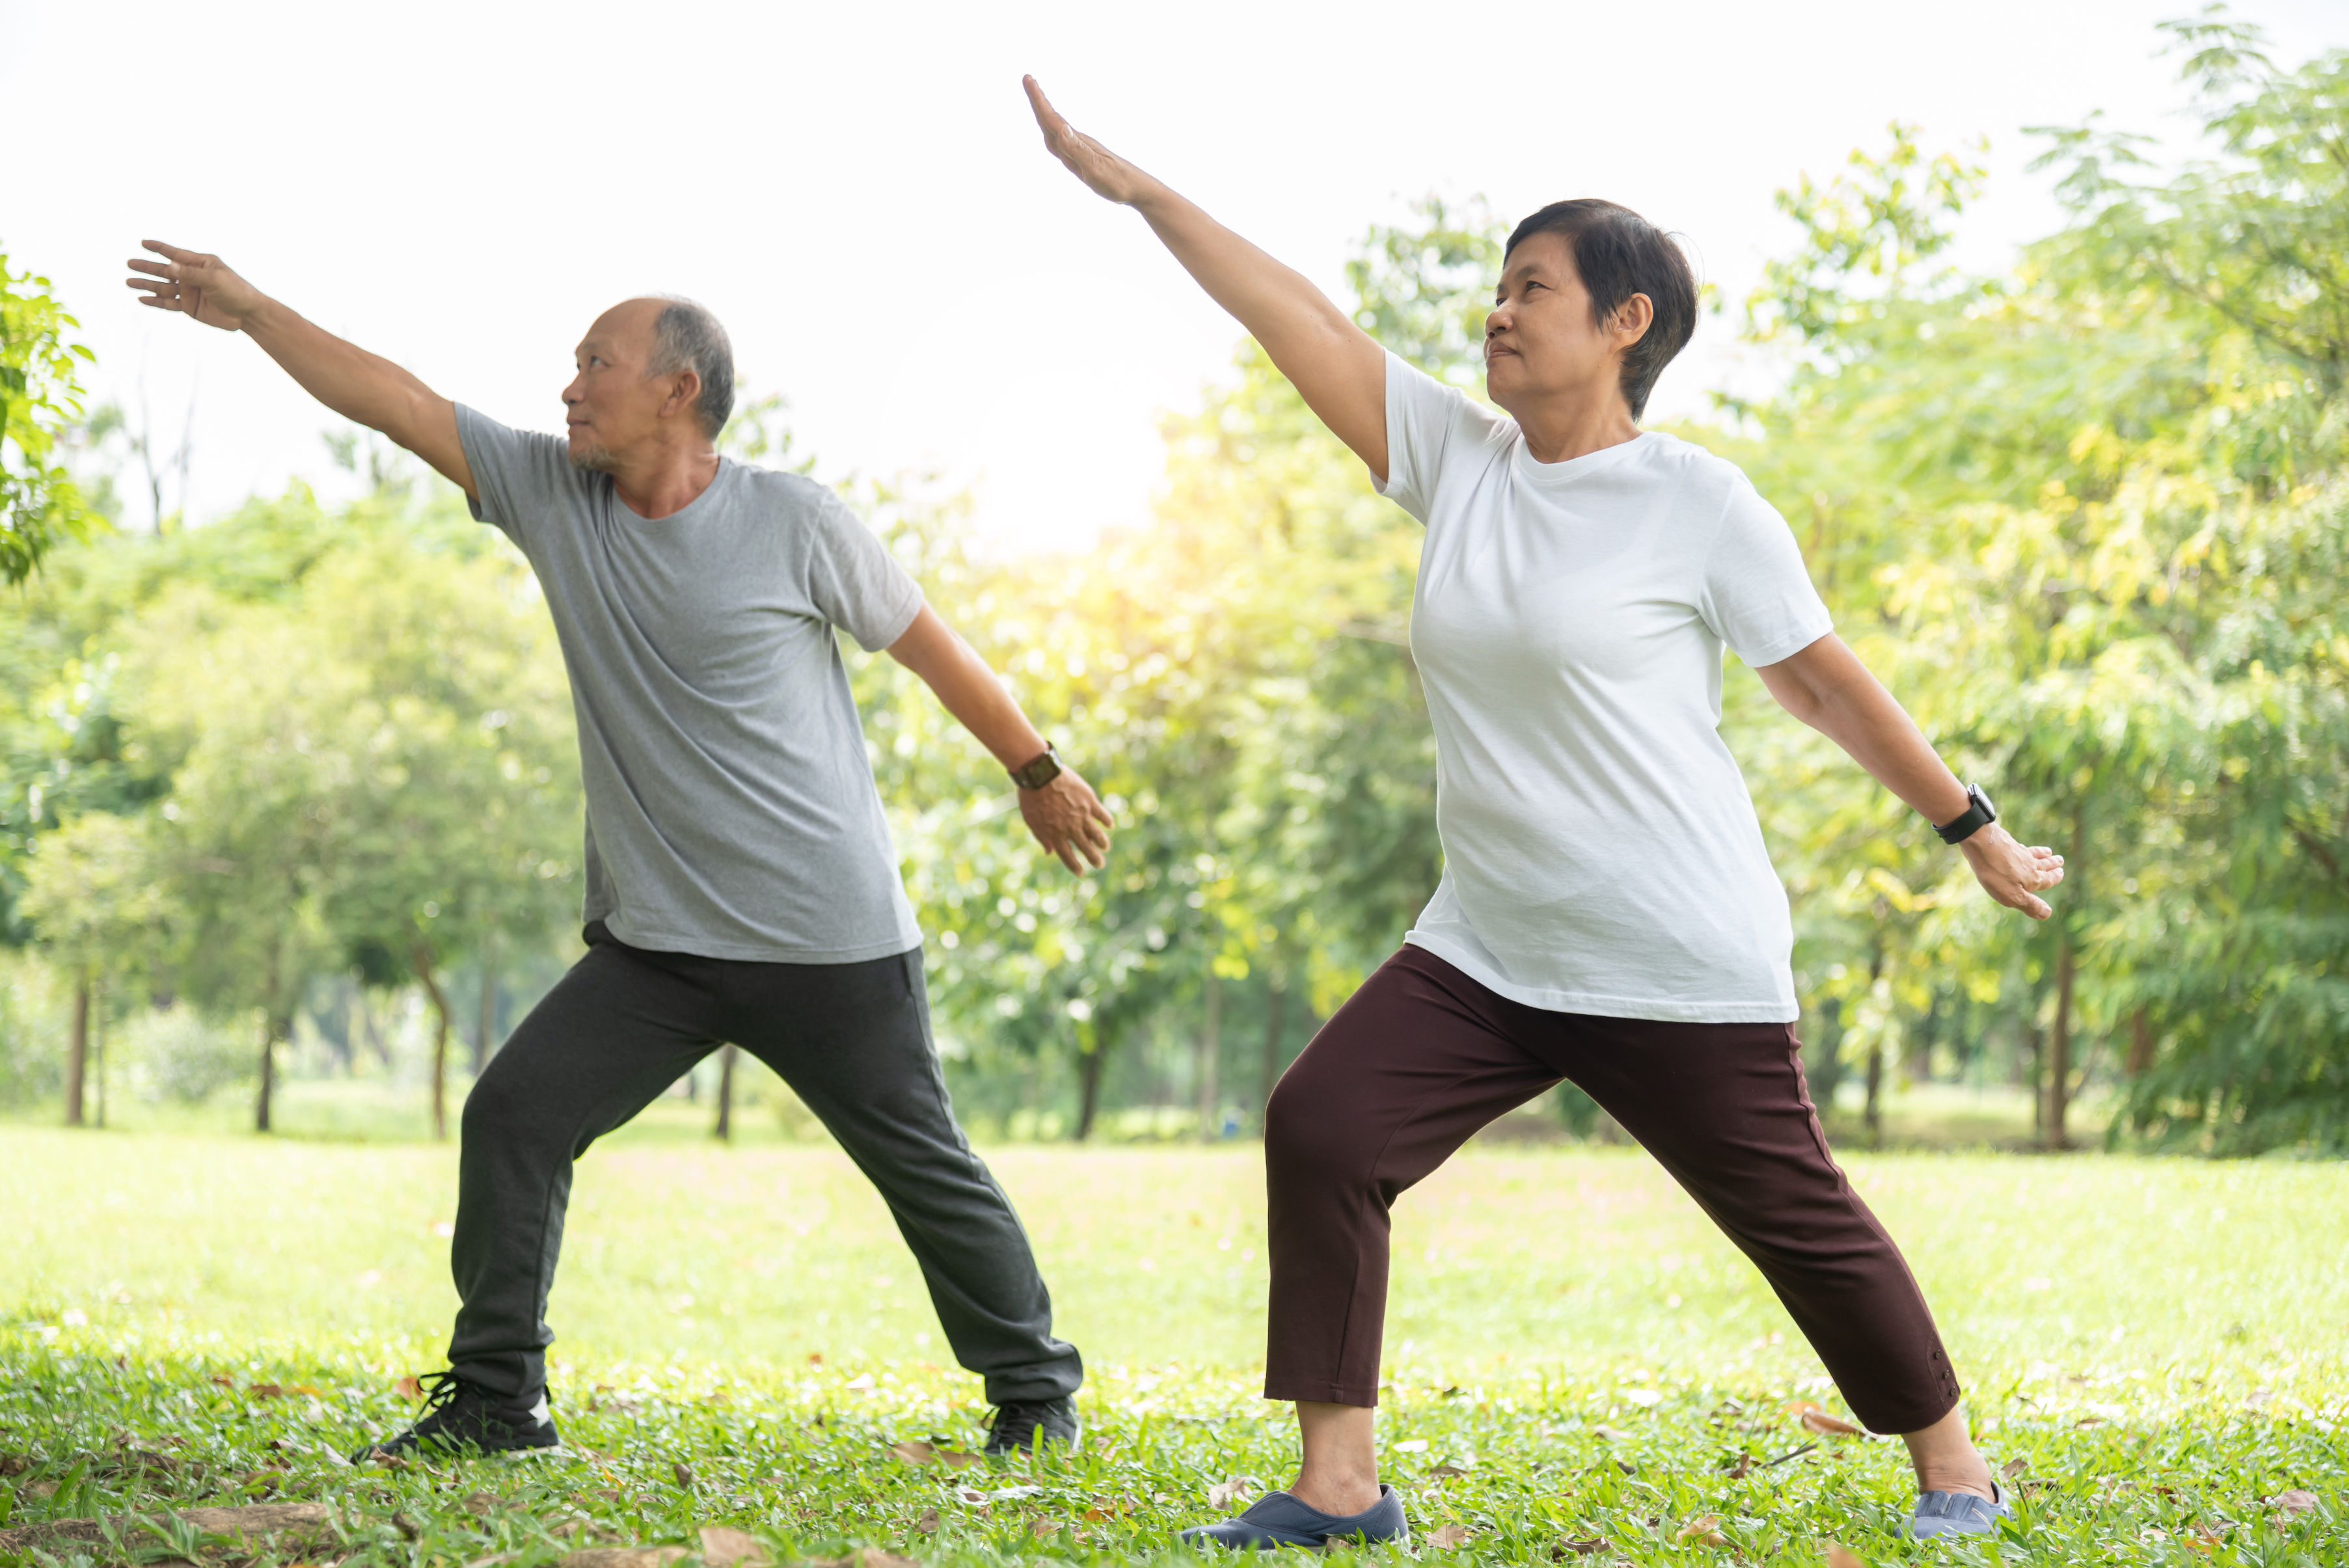 Movement is an effective tool for older adults at risk for falls